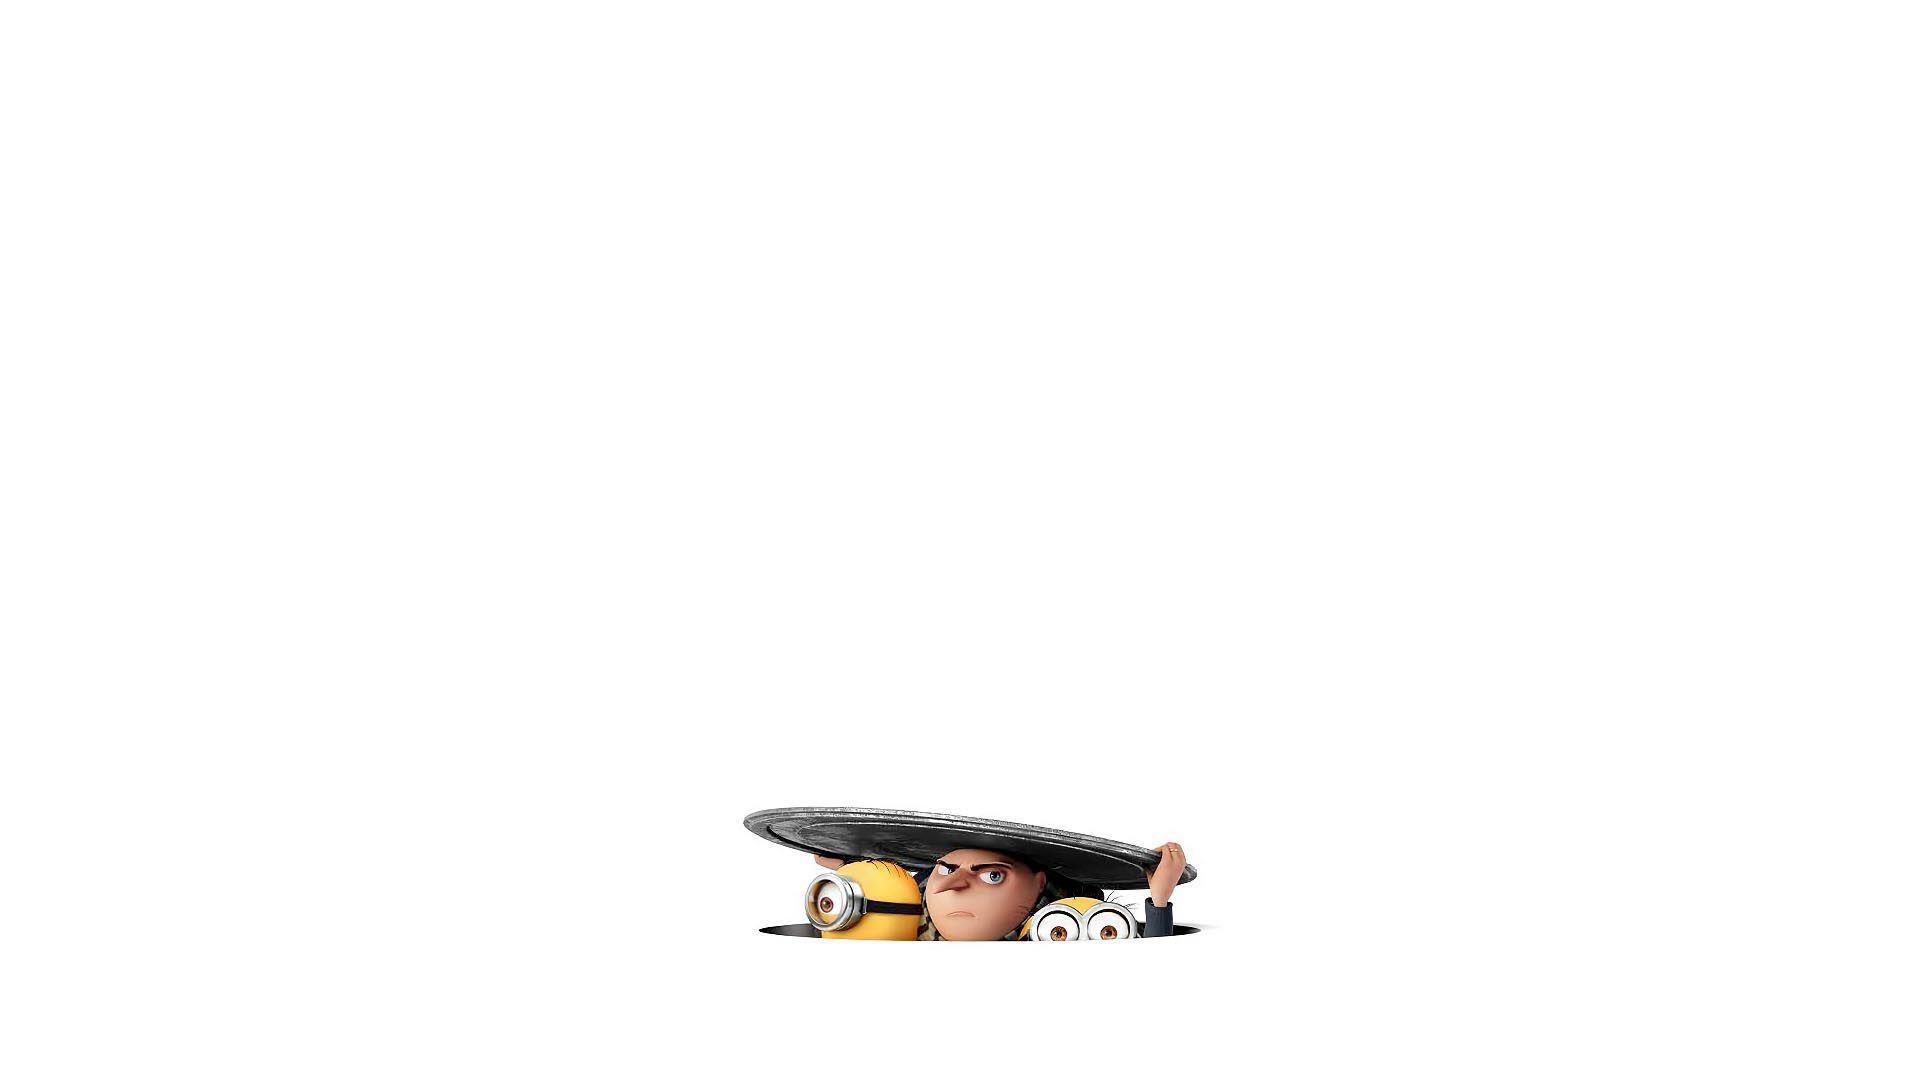 for iphone download Despicable Me 3 free